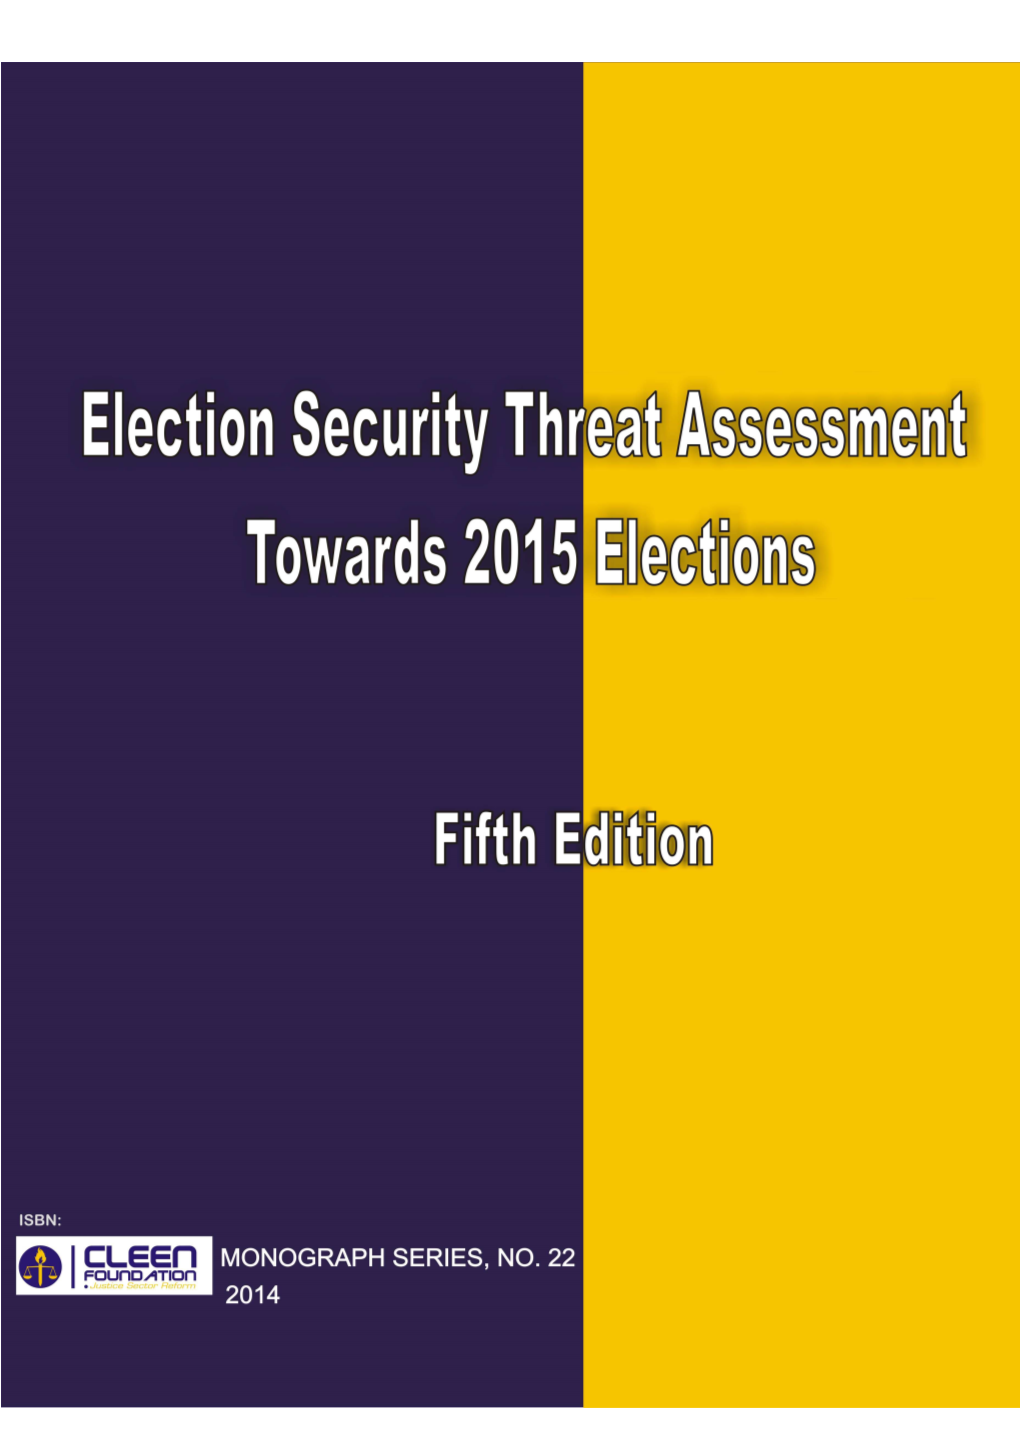 Election Security Threat Assessment Towards 2015 Elections Fifth Edition